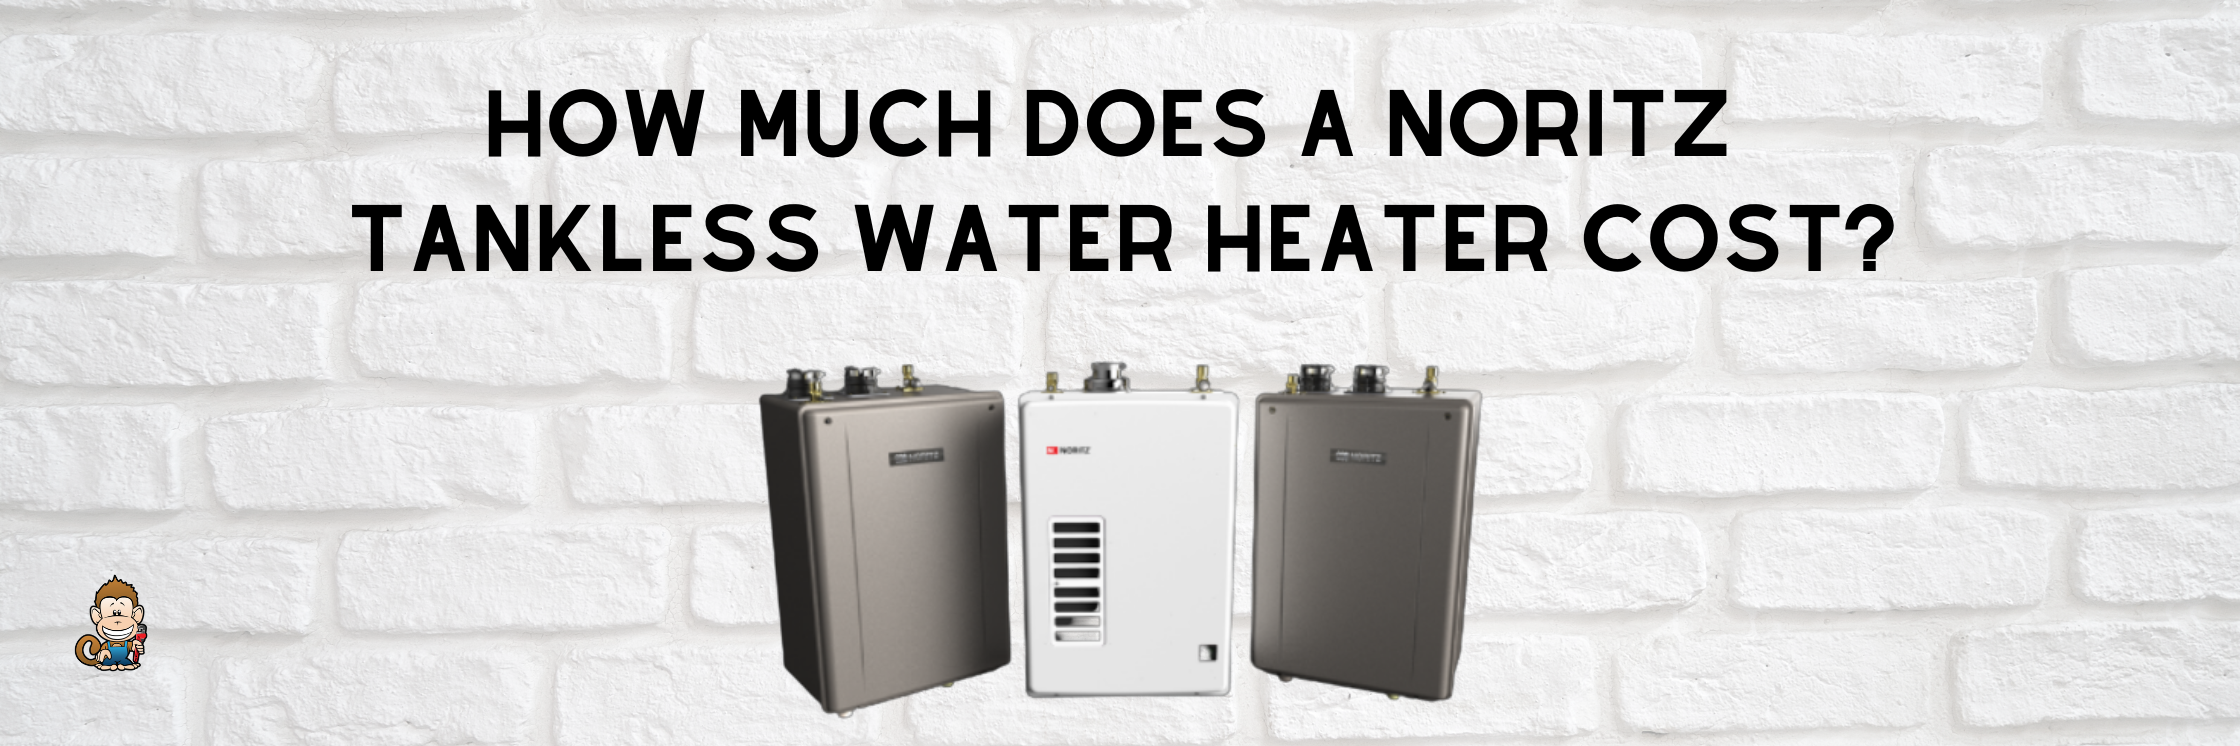 How Much Does a Noritz Tankless Water Heater Cost?